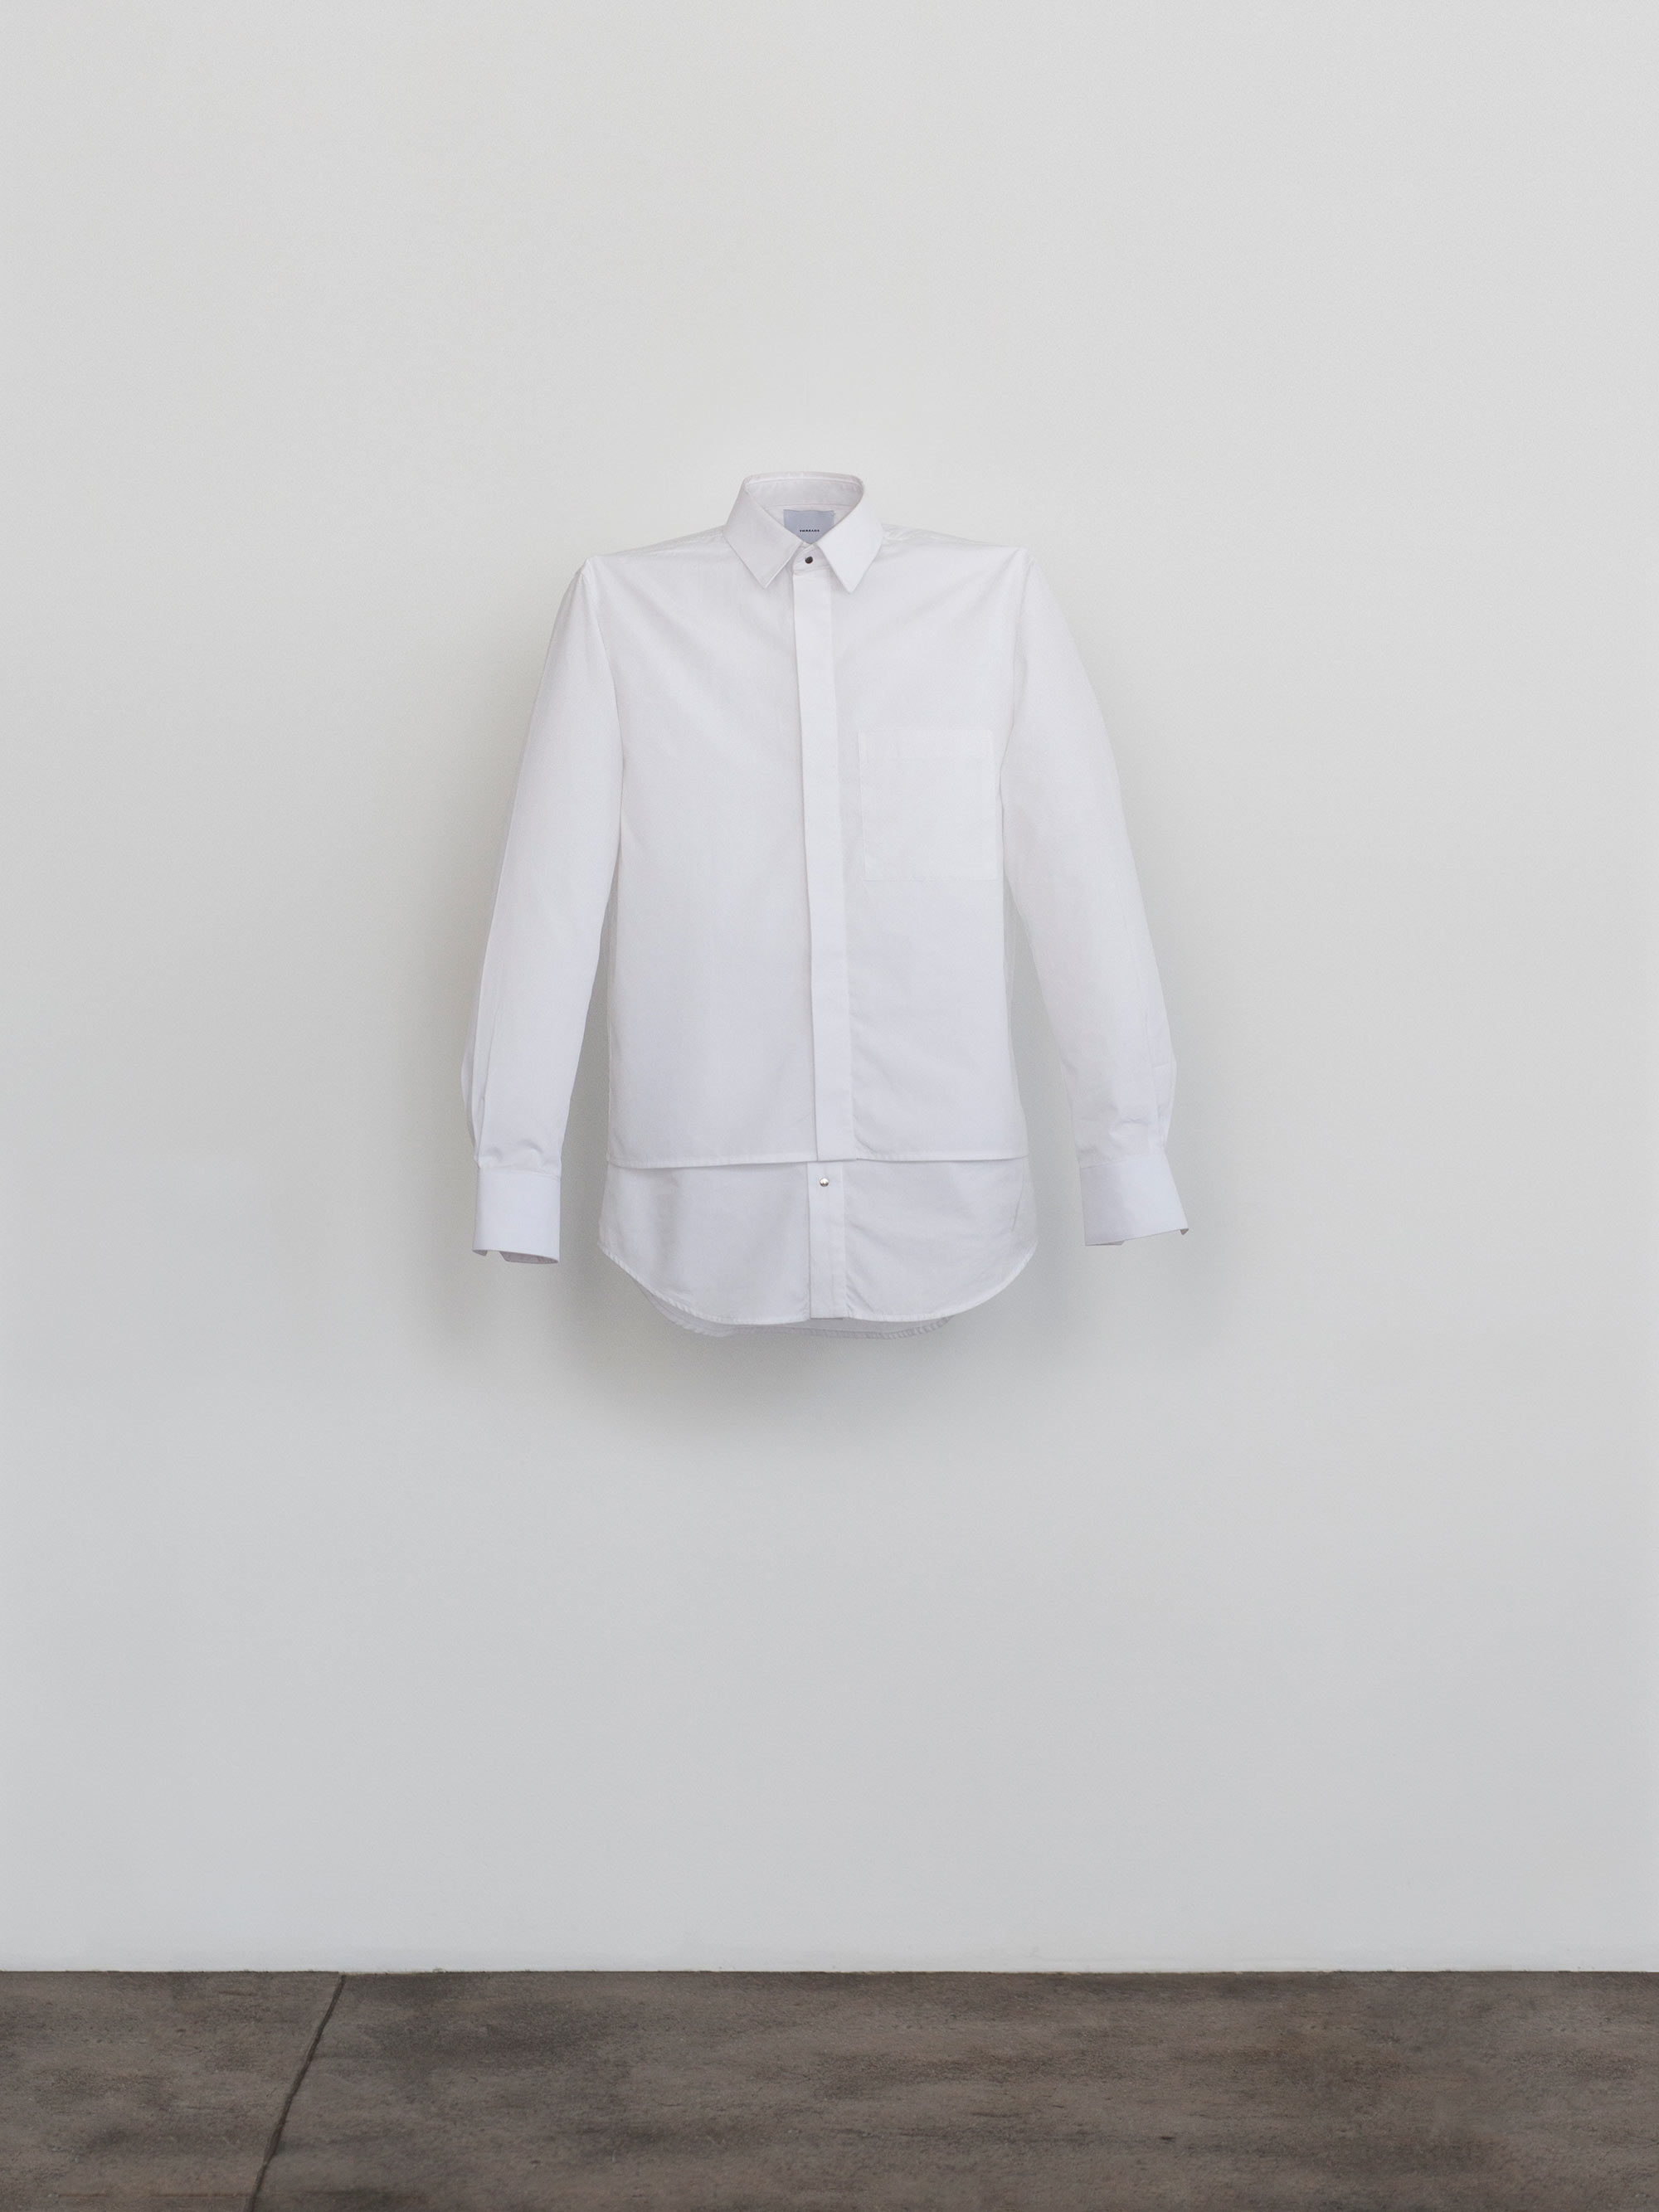 This white dress shirt is naturally suspended. It is not a photoshop effect.